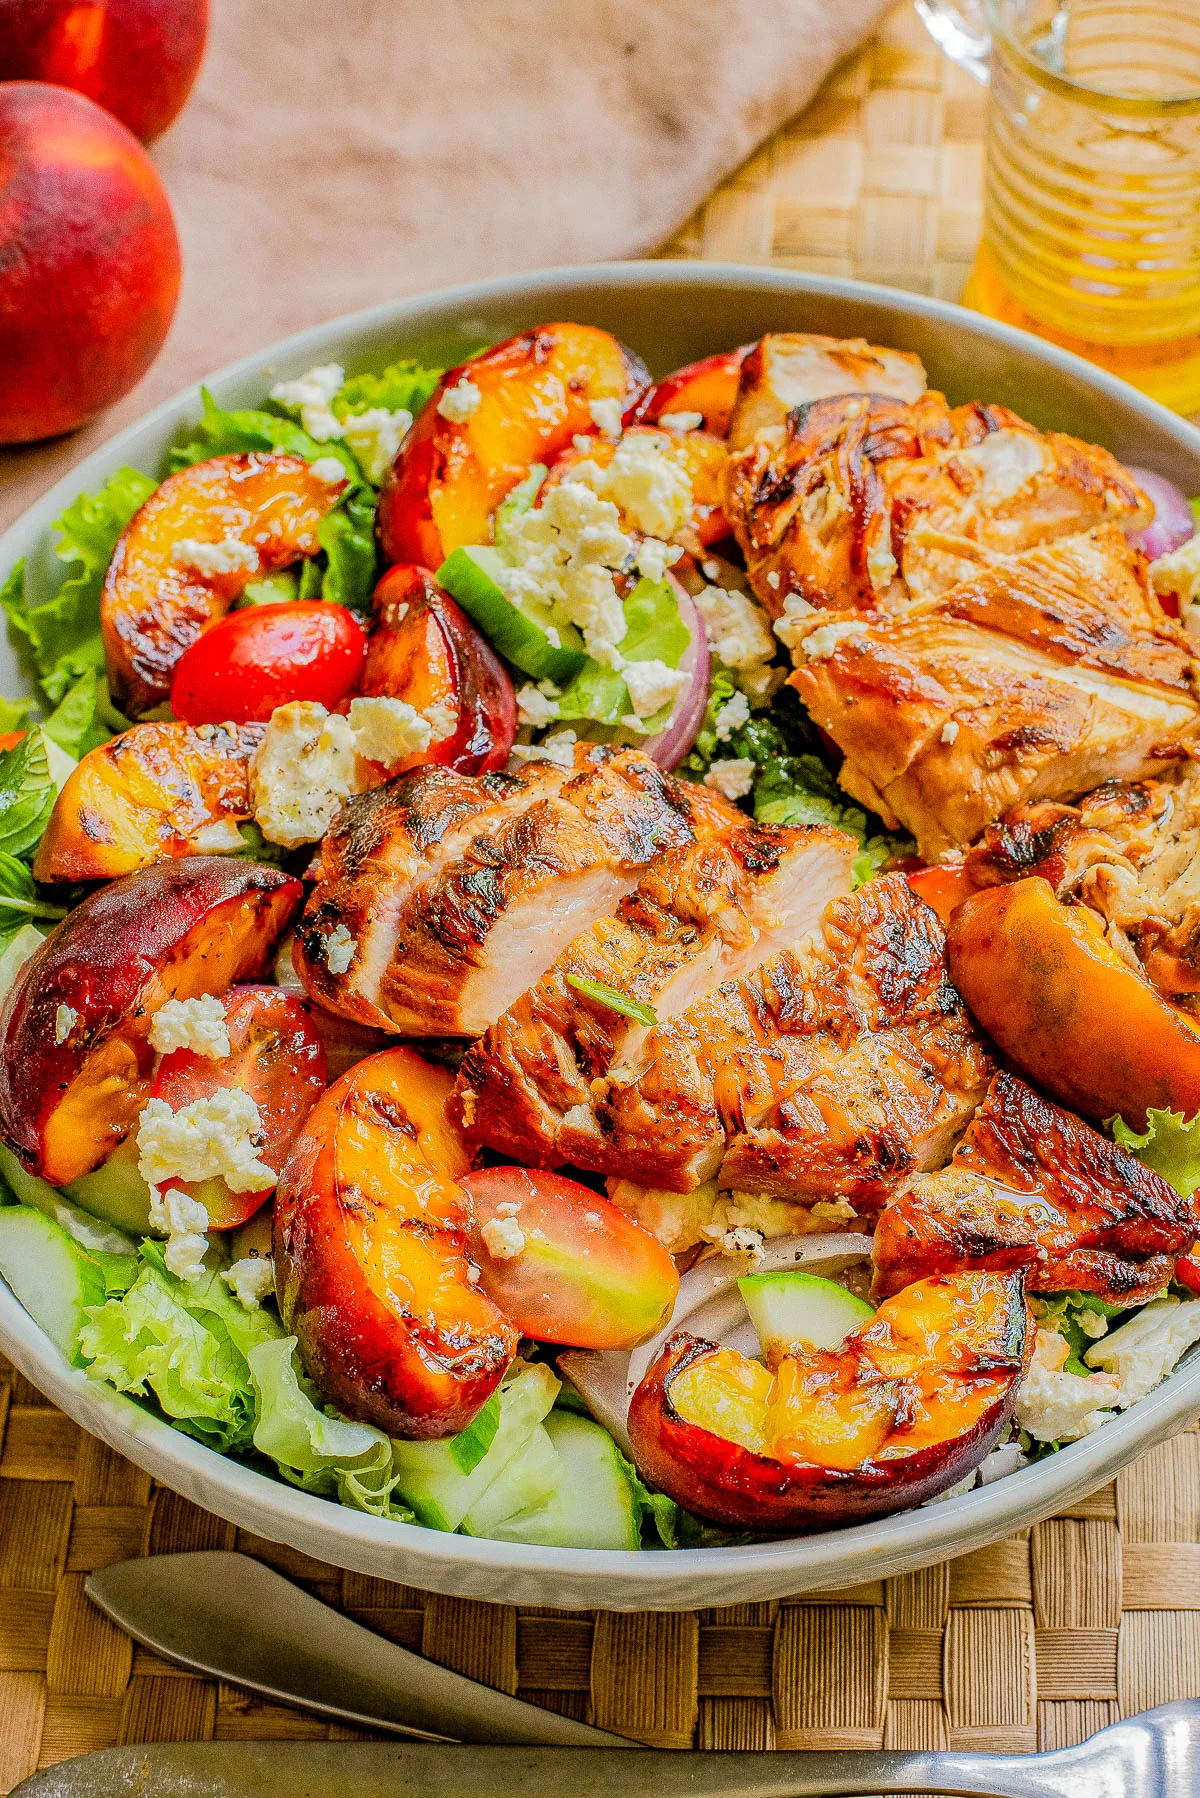 Grilled Peach and Chicken Salad with Lemon Vinaigrette